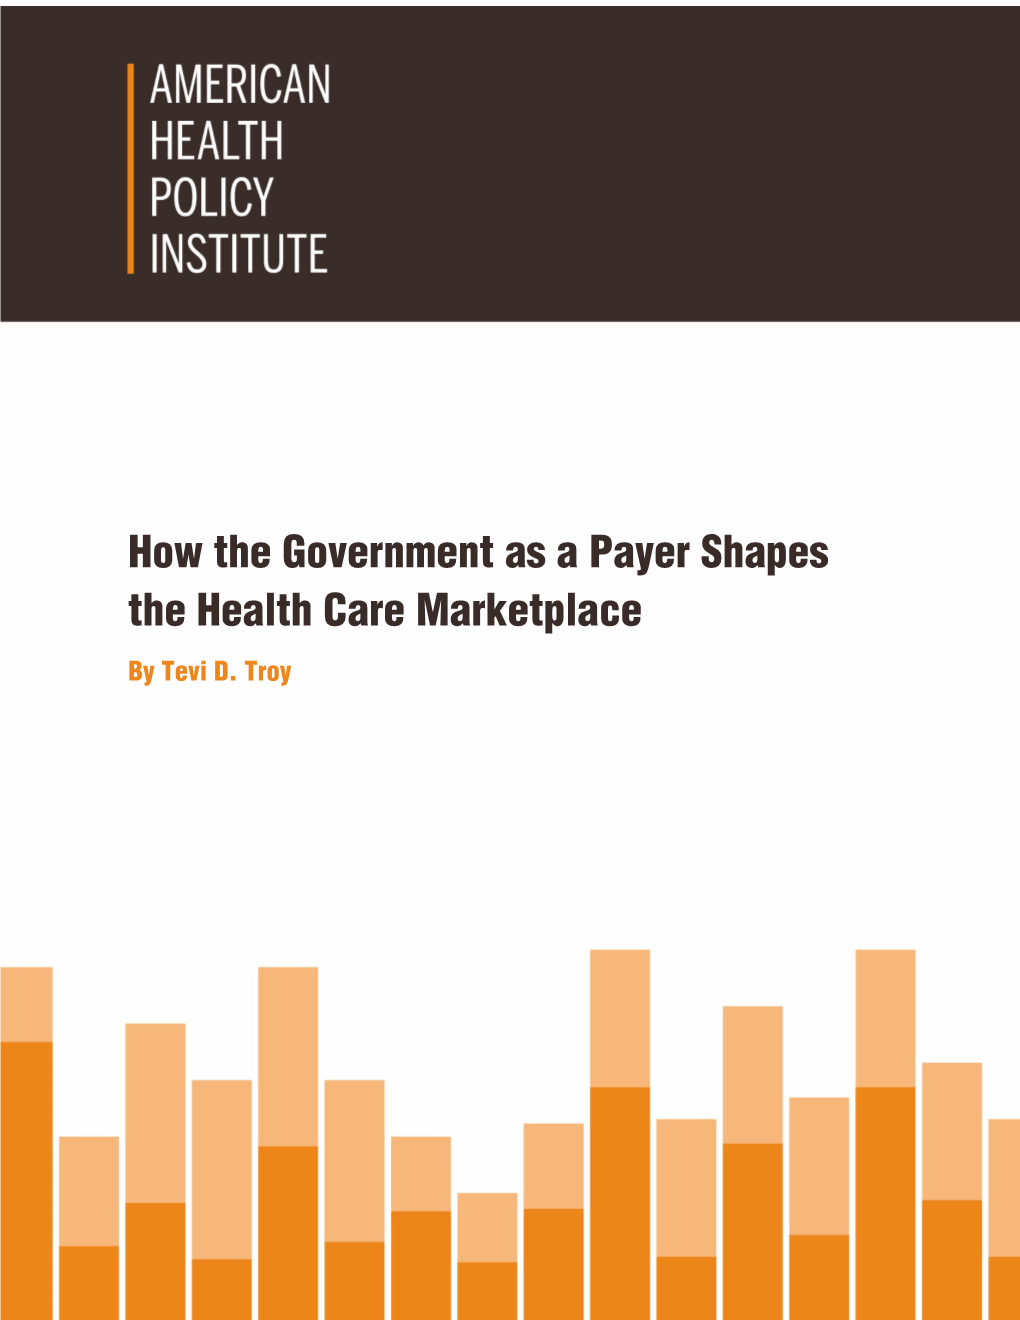 How the Government As a Payer Shapes the Health Care Marketplace by Tevi D